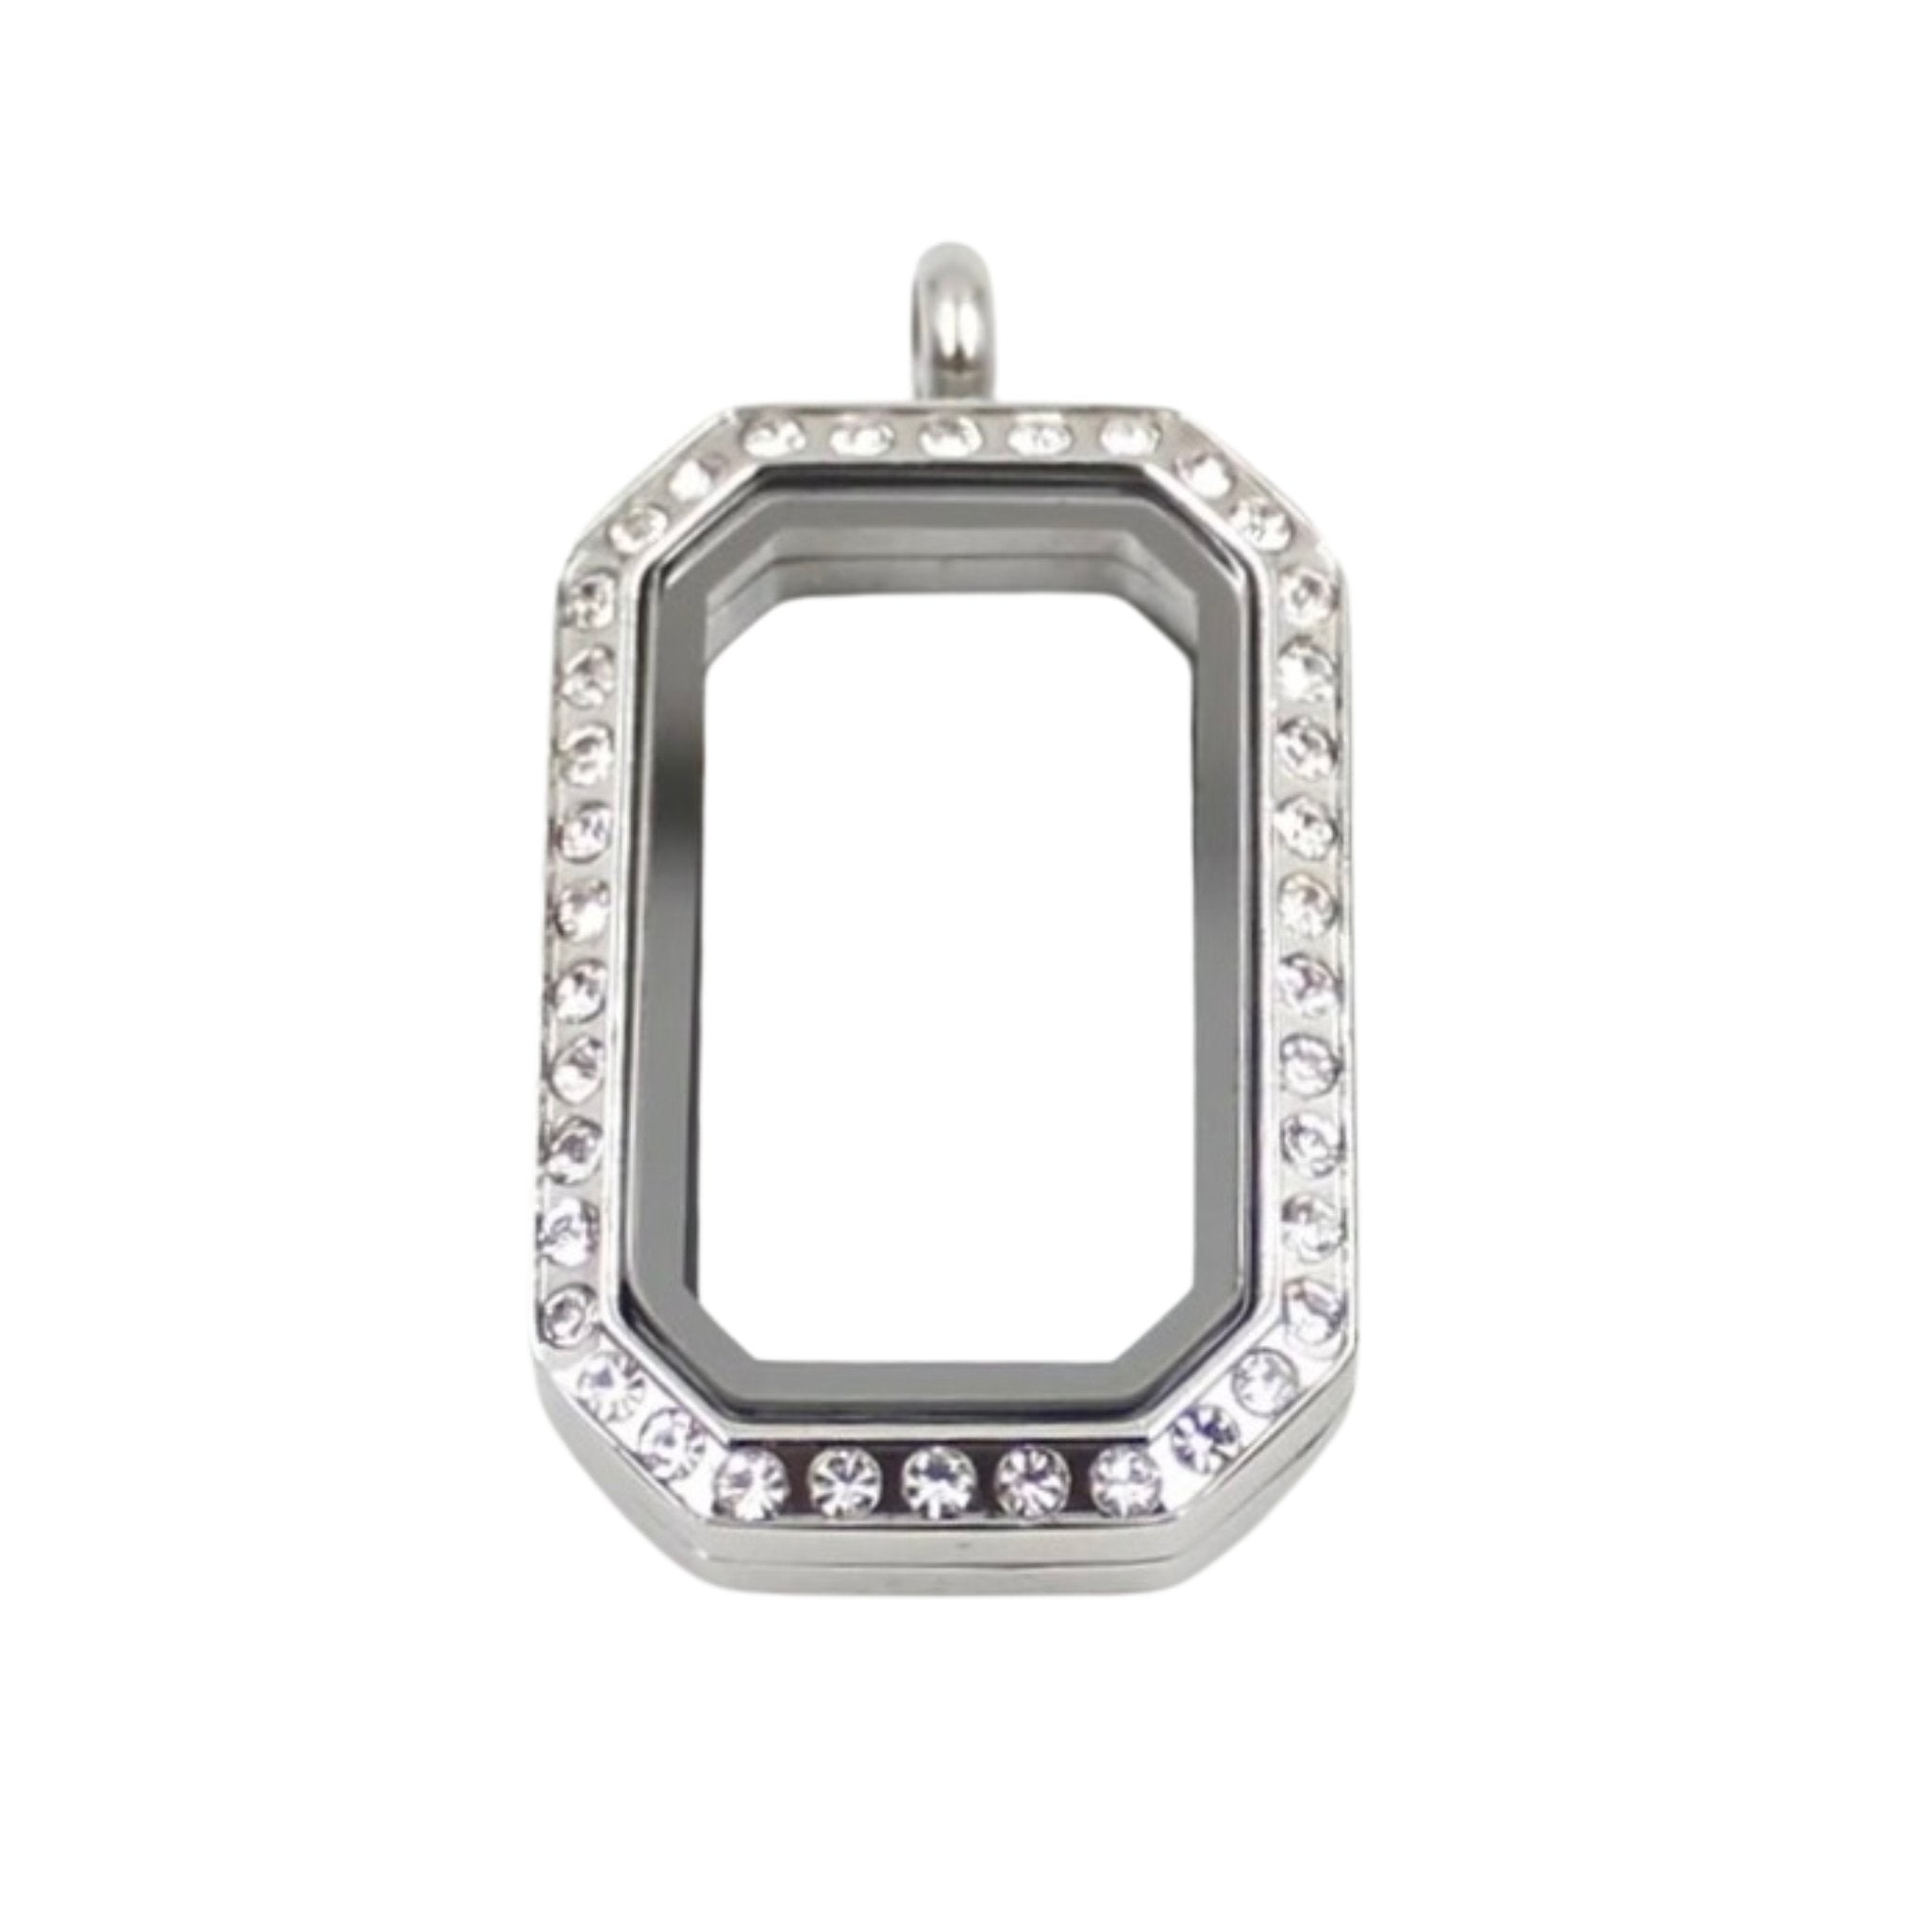 NEW! Limited Edition Memory Locket - Portrait Frame with Crystals